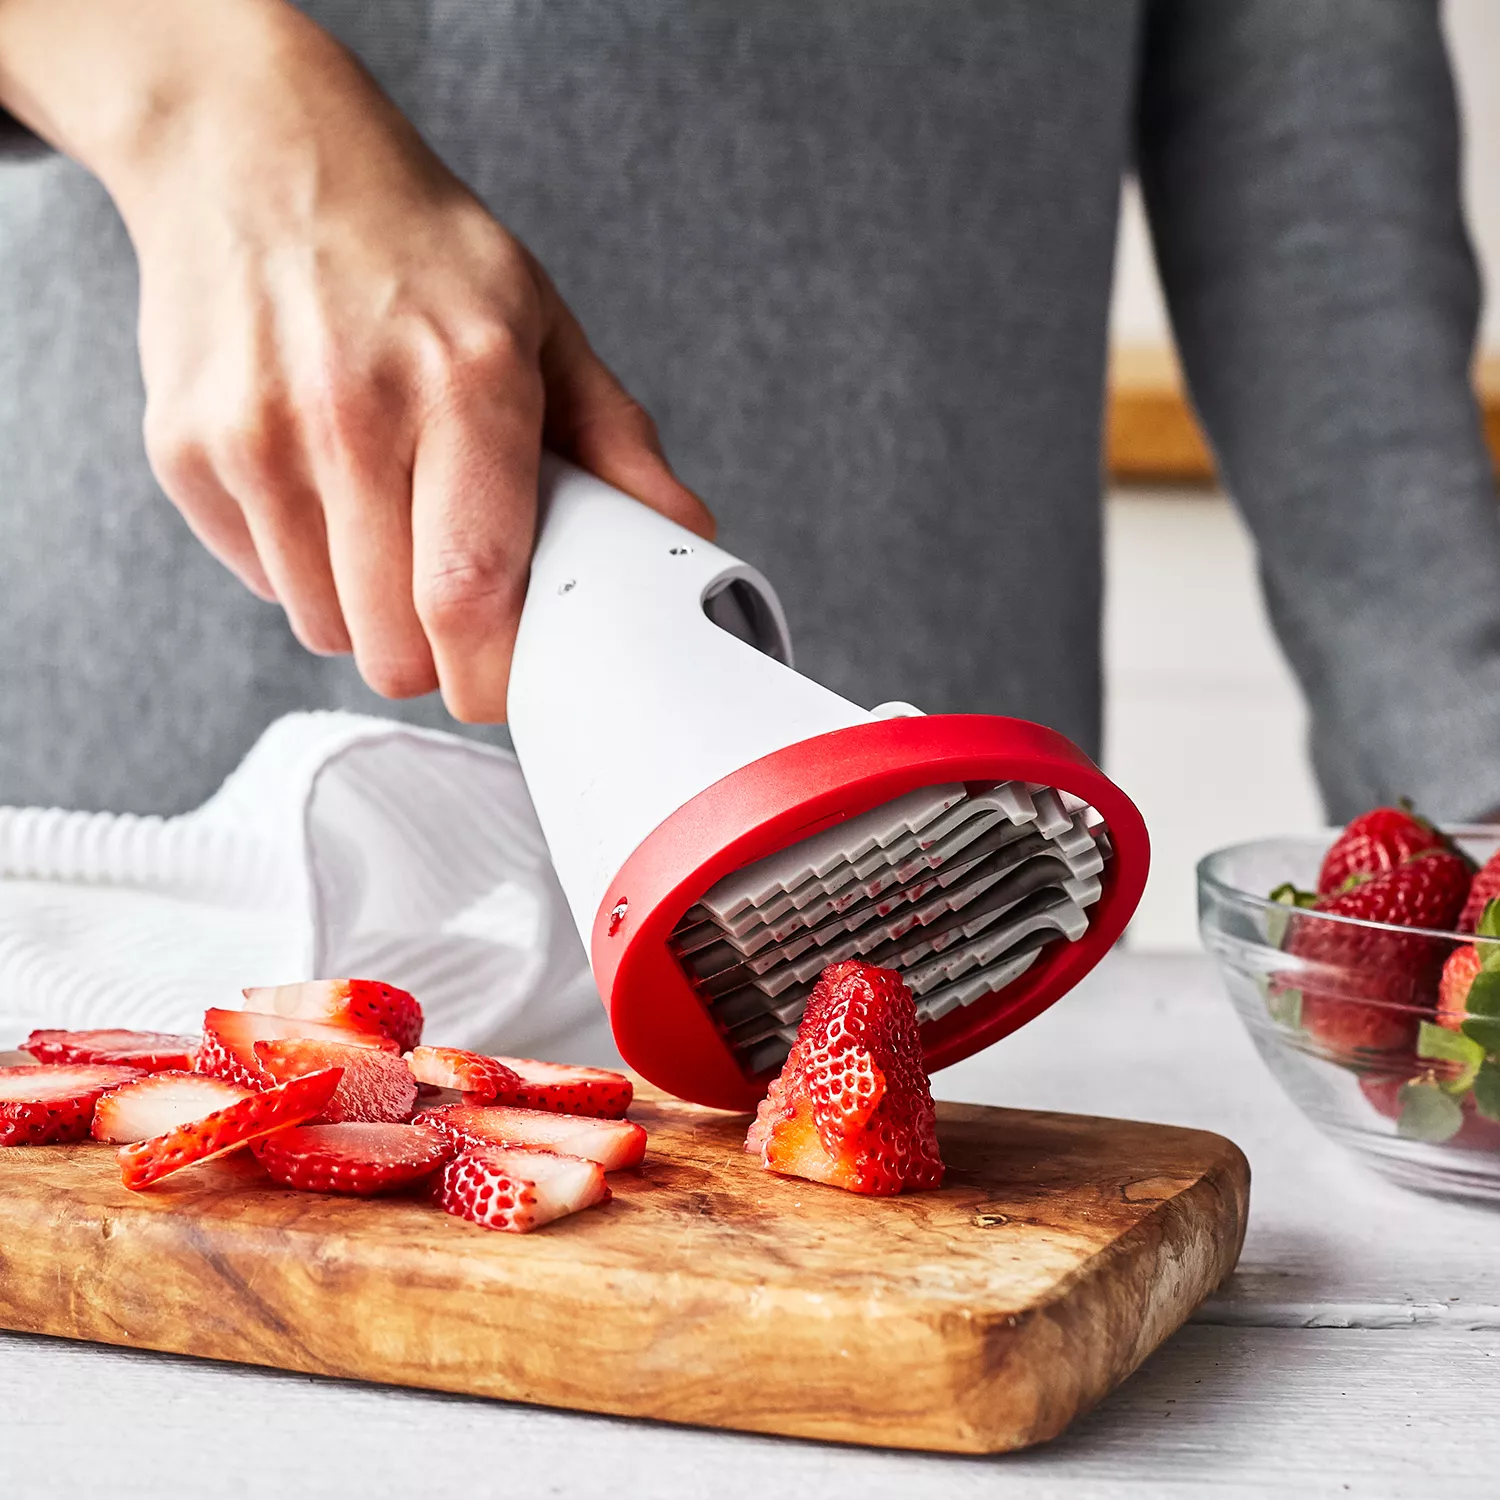 HIC Stainless Steel Blade Strawberry Slicer - Quickly Cut Uniform Slices